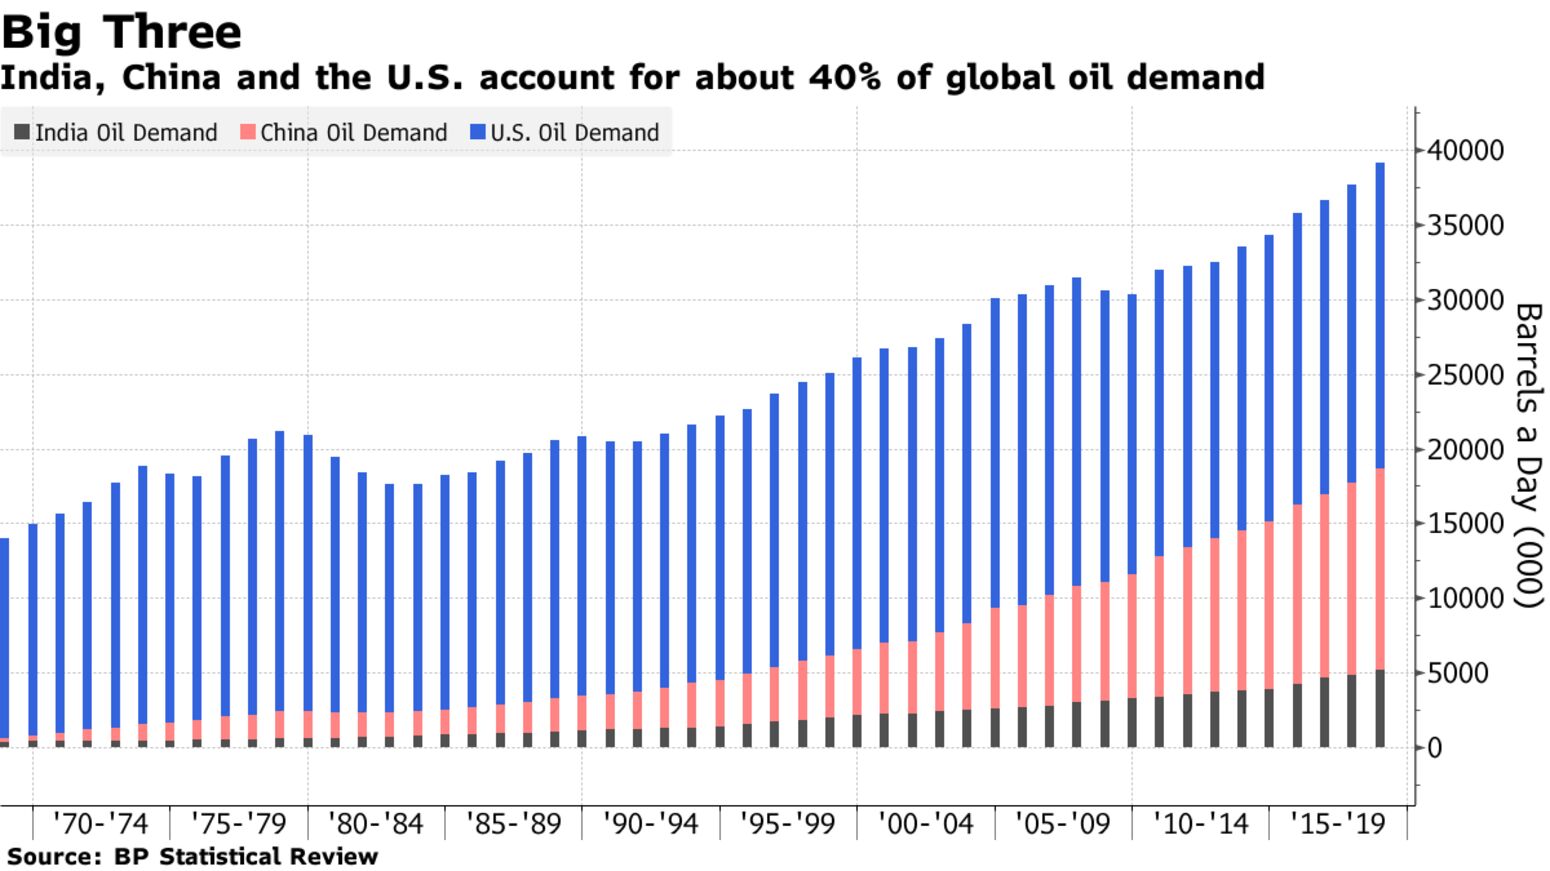 India, China and the U.S. account for about 40% of global oil demand